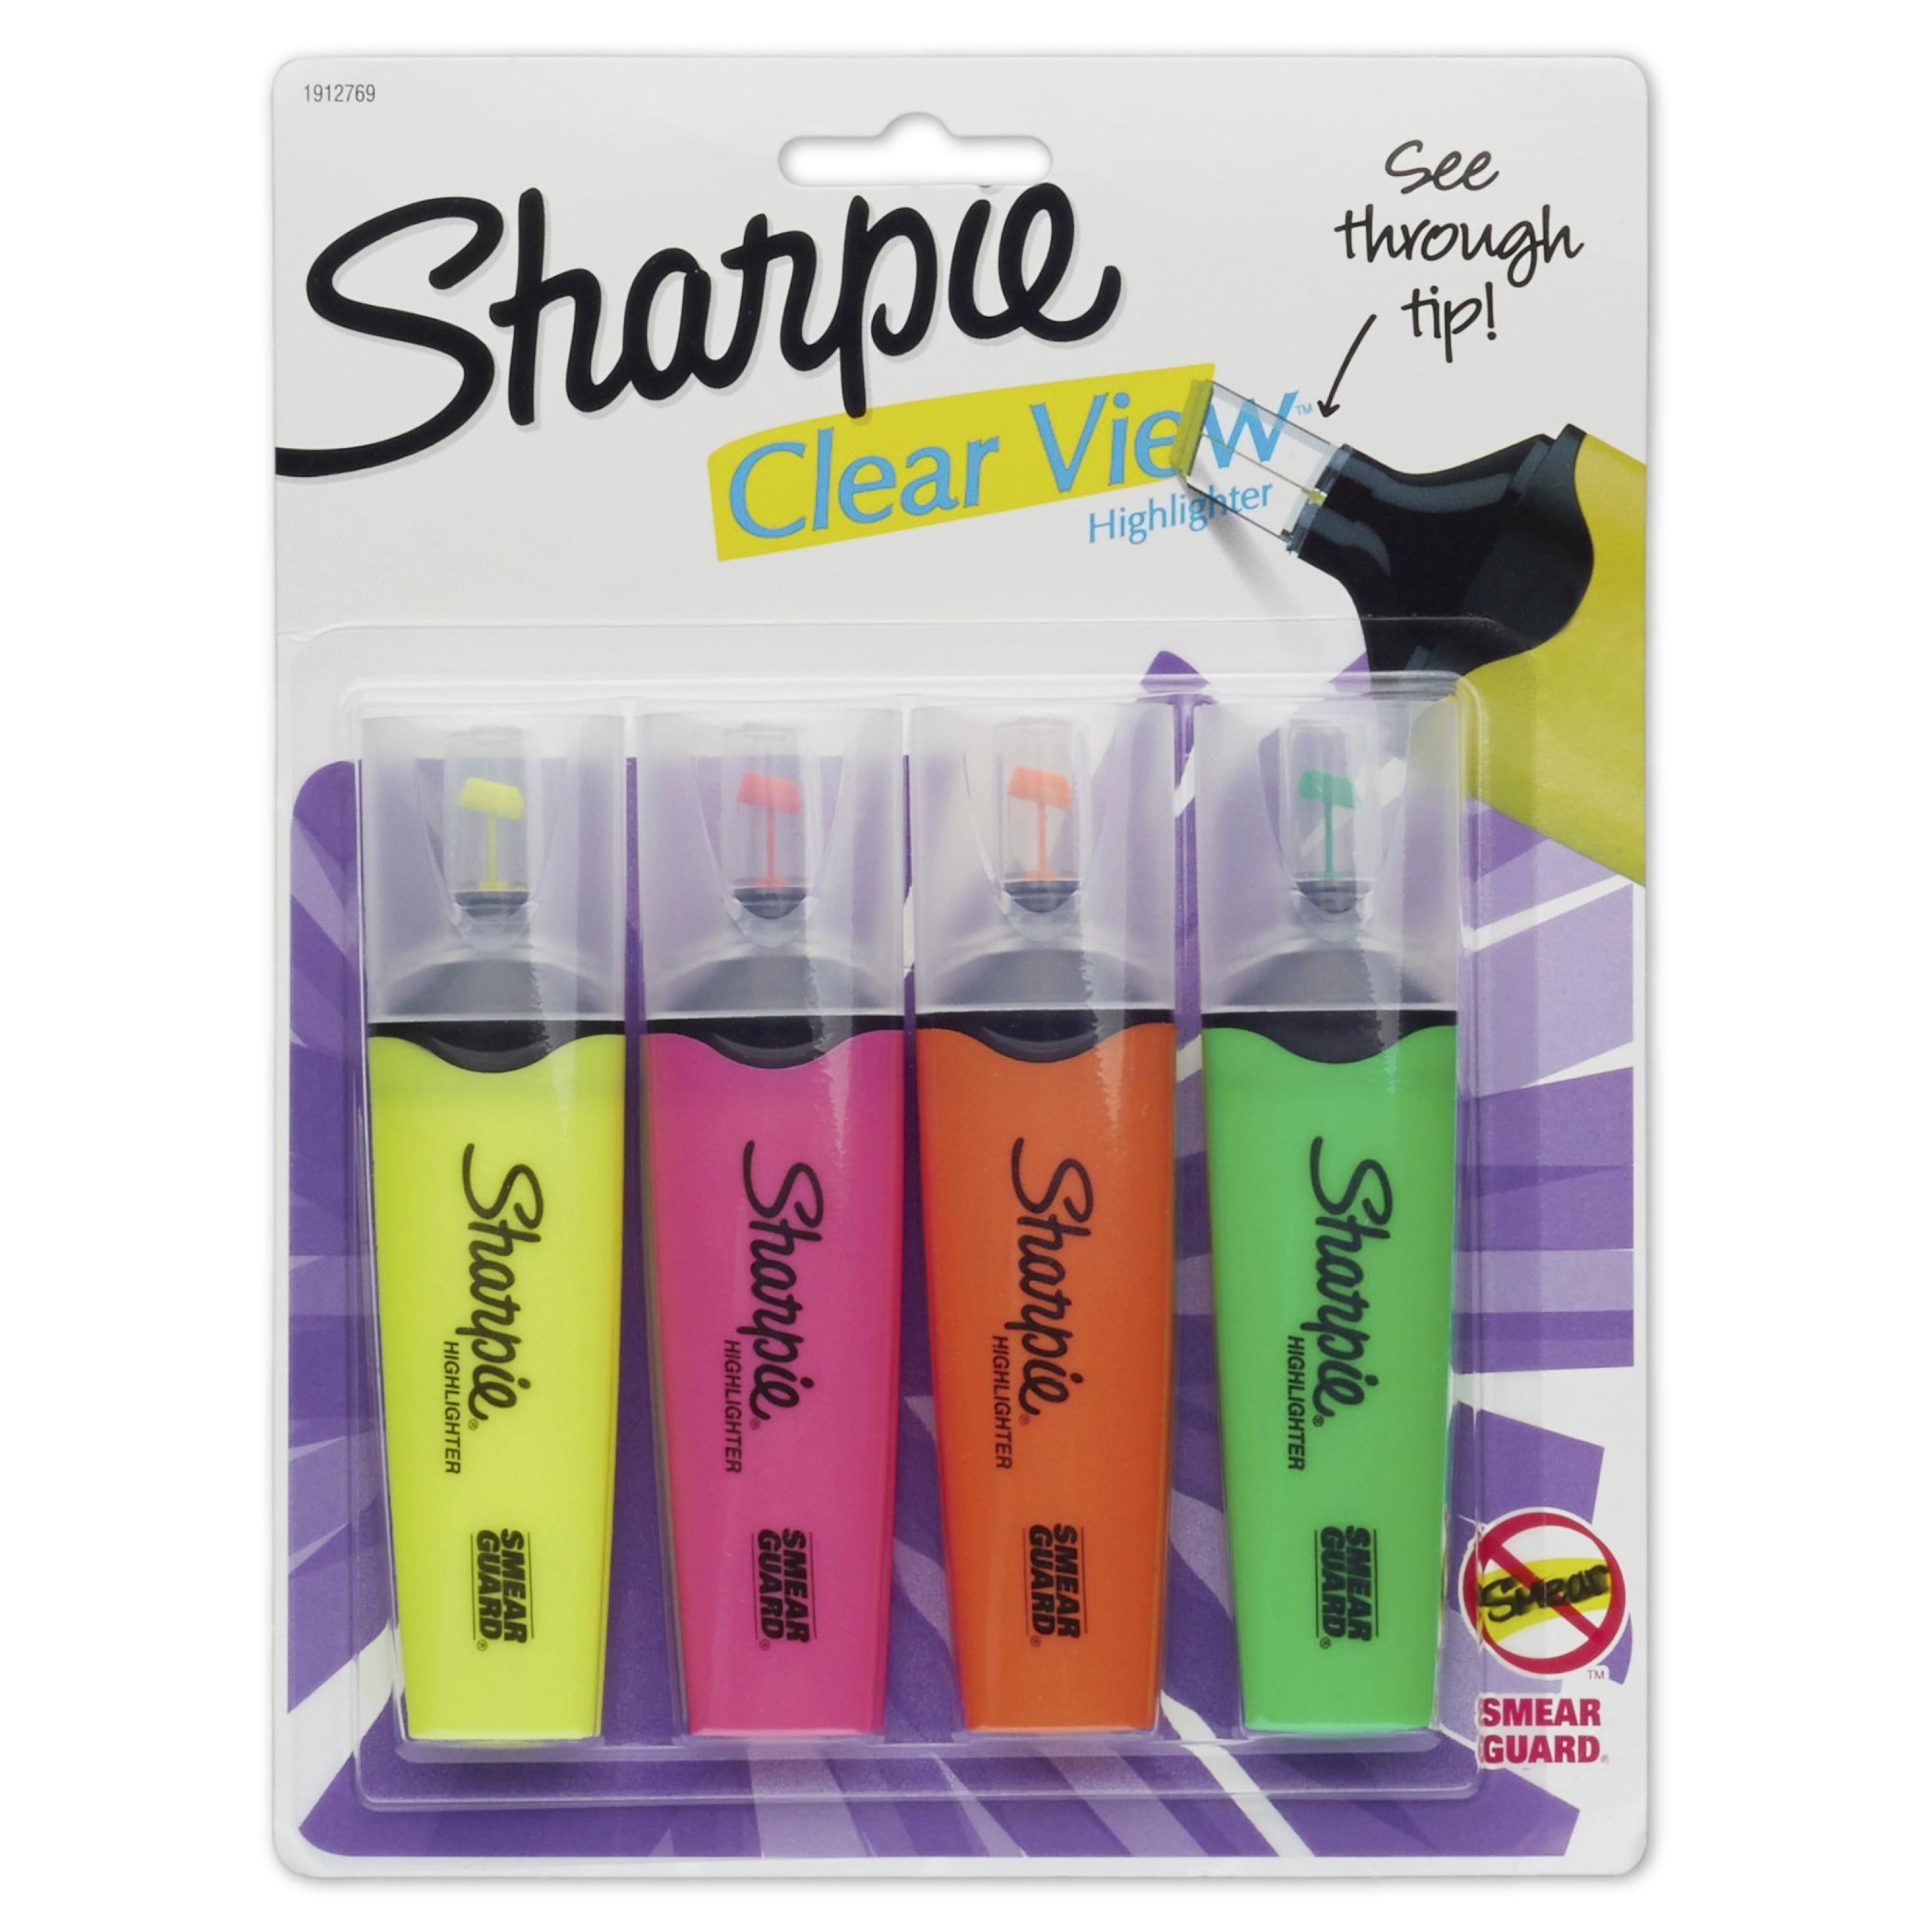 Sharpie Clearview Stick Highlighters - Assorted Colours (Blister of 4)